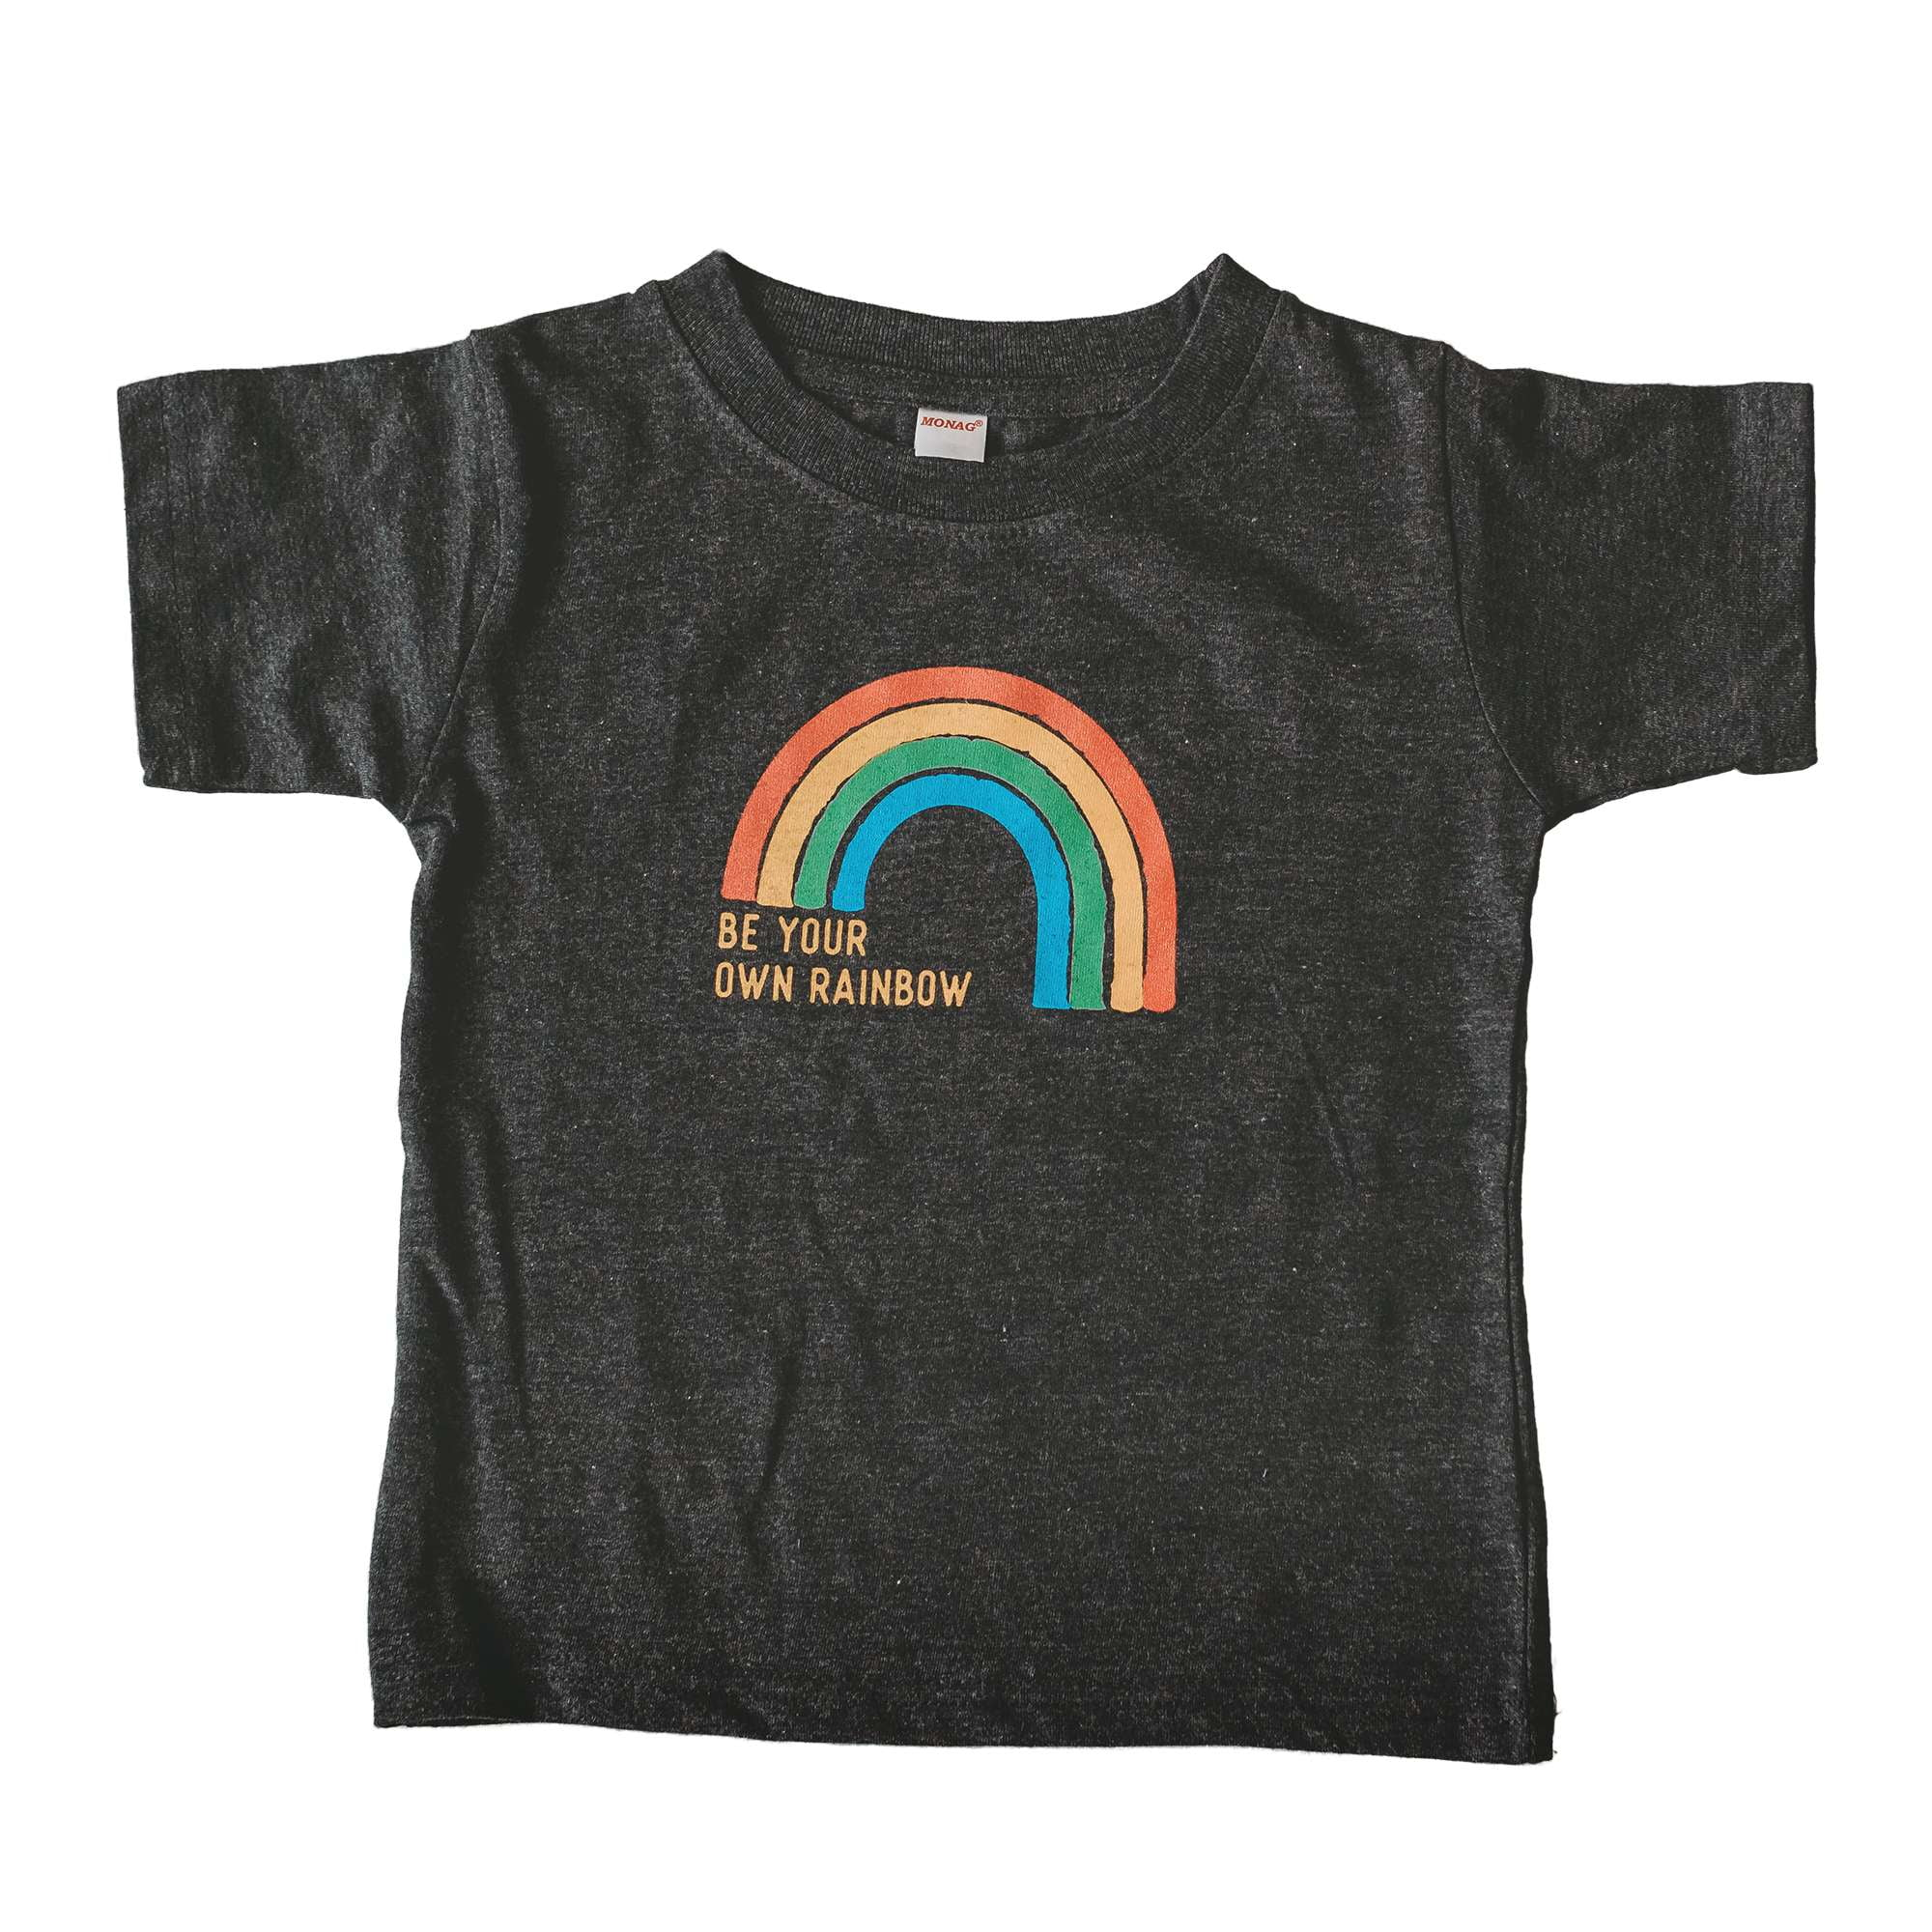 Be Your Own Rainbow Kid's T-shirt - Sweetpea and Co.